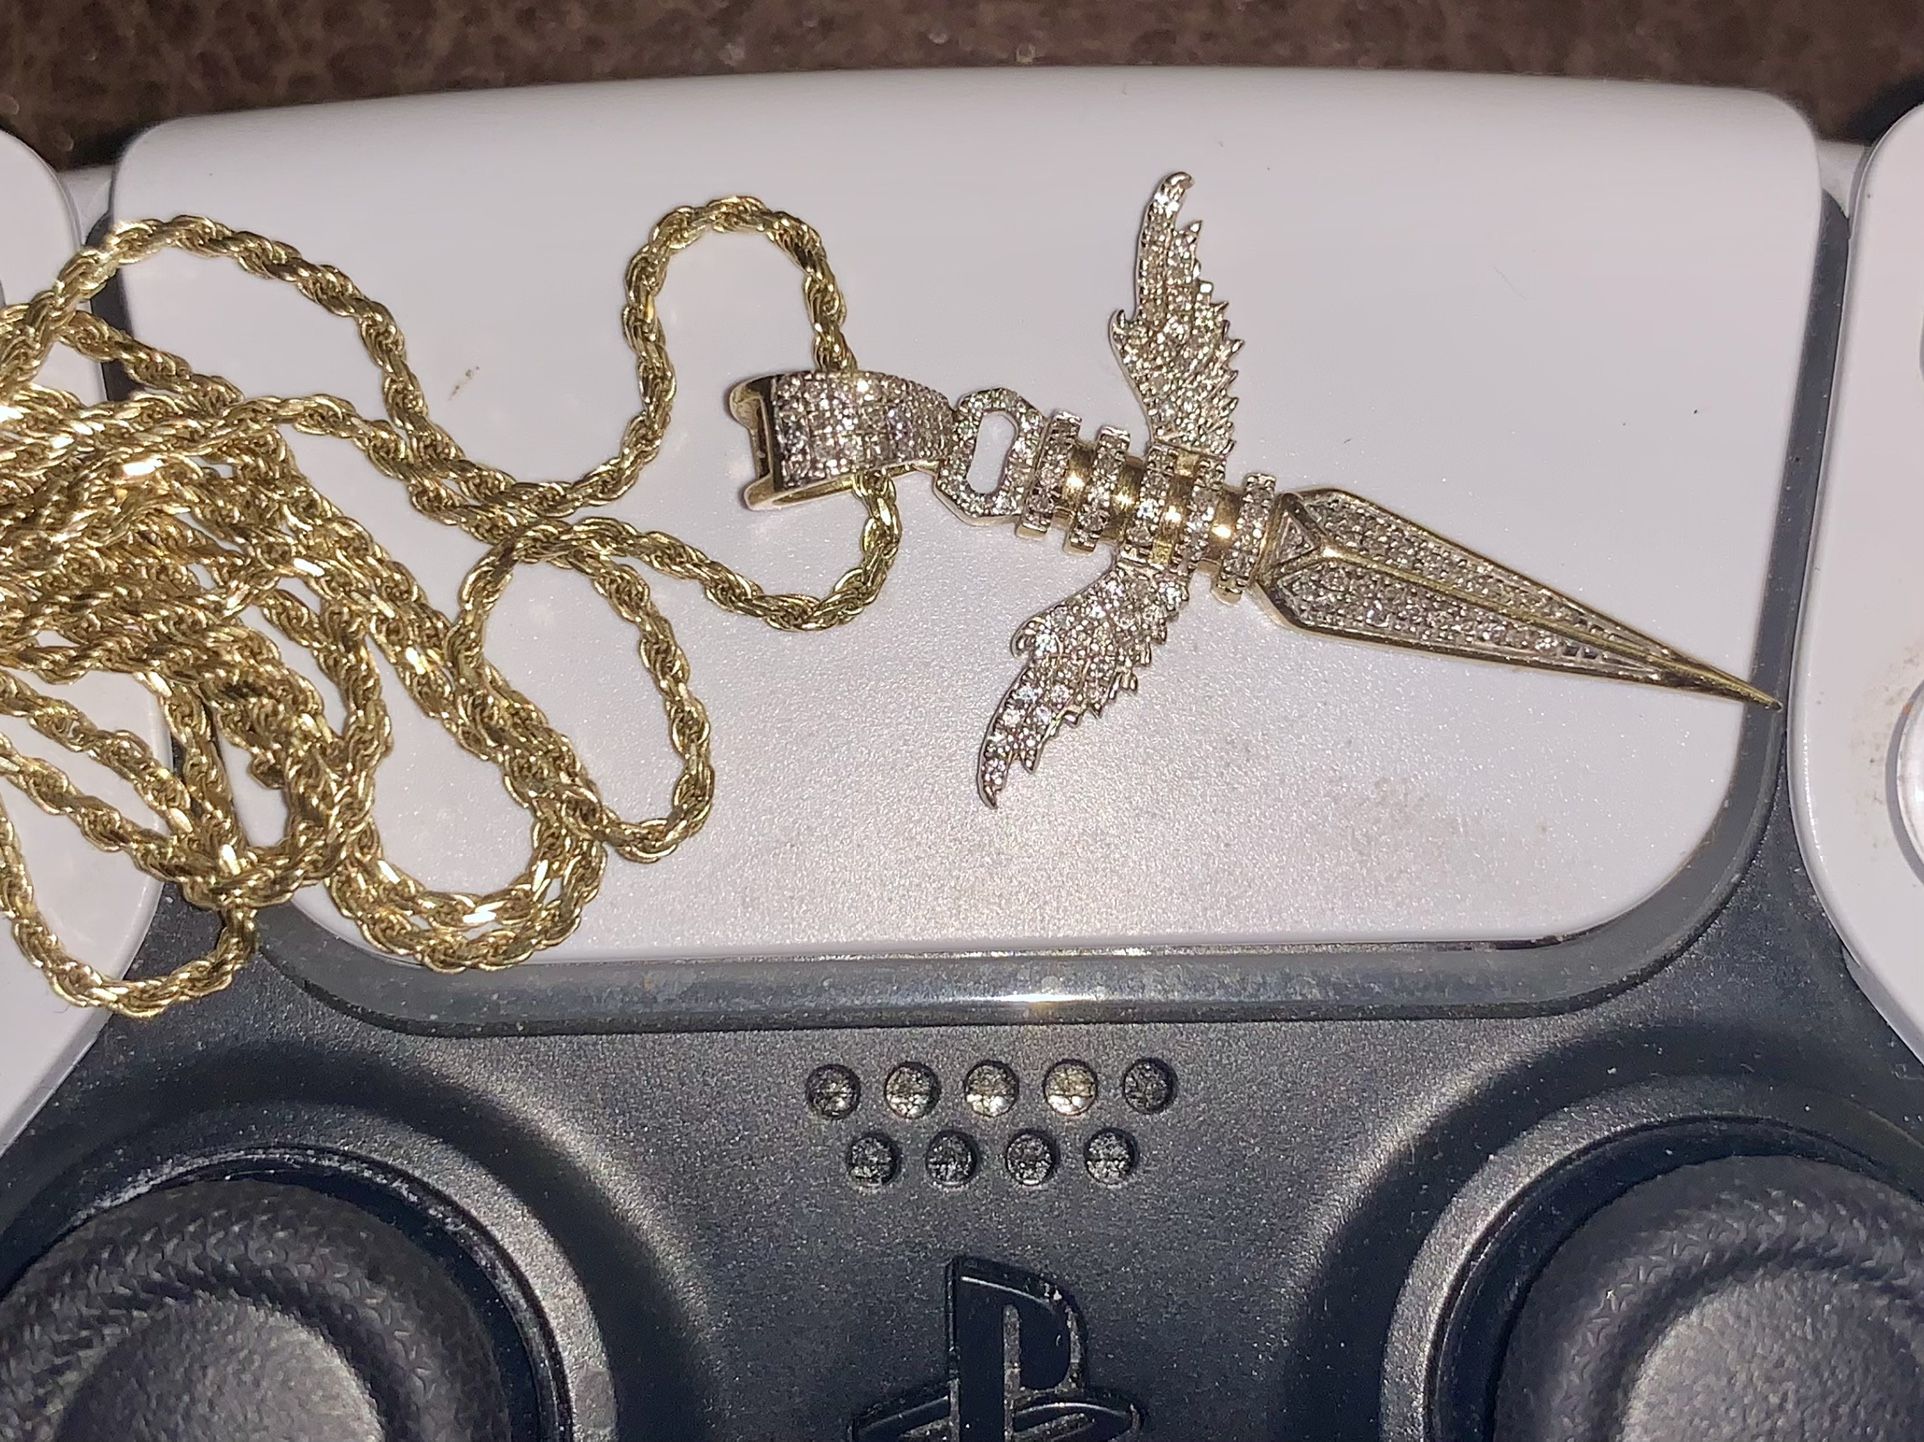 10 karat solid gold dagger cross pendant with wings real diamonds and 10 karat gold rope chain 100% real willing to meet anywhere to verify 600  cash